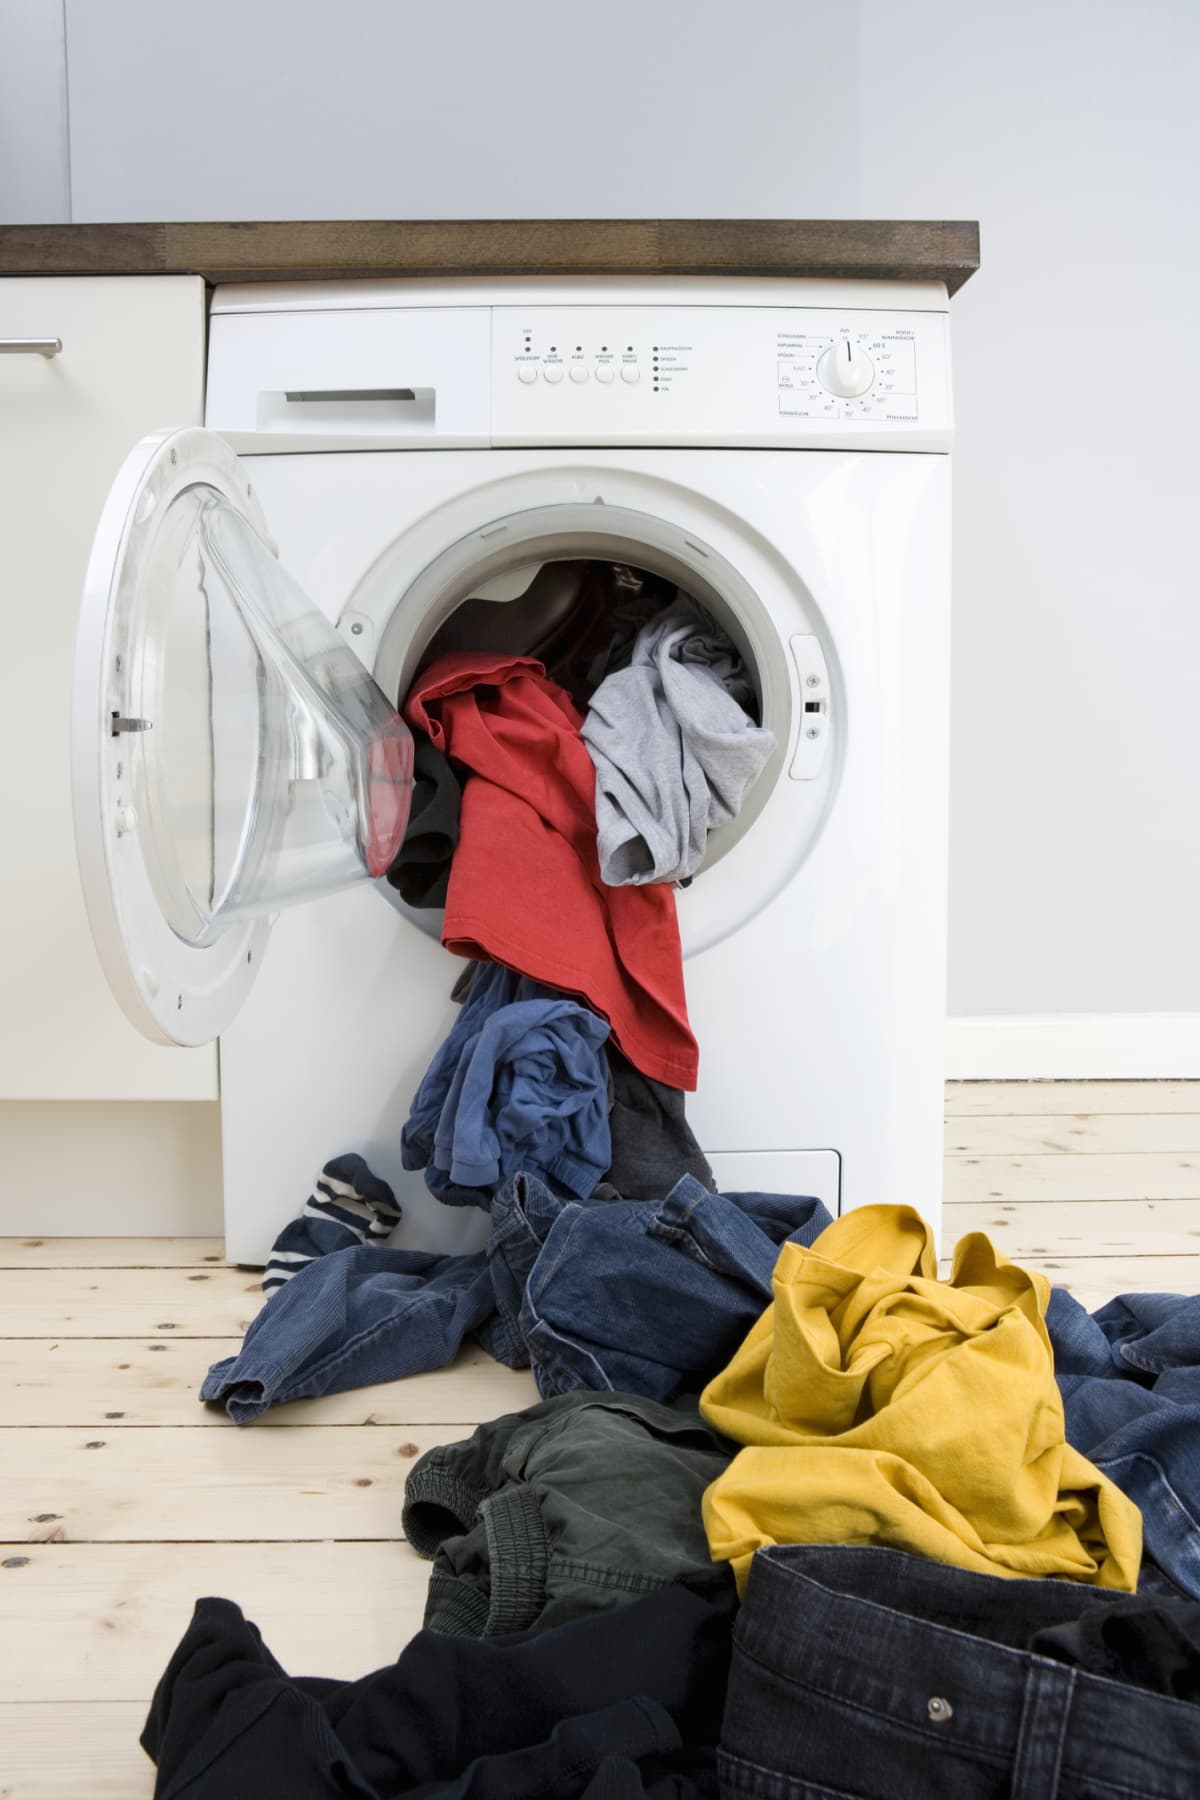 Clothes spilling out of a washing machine